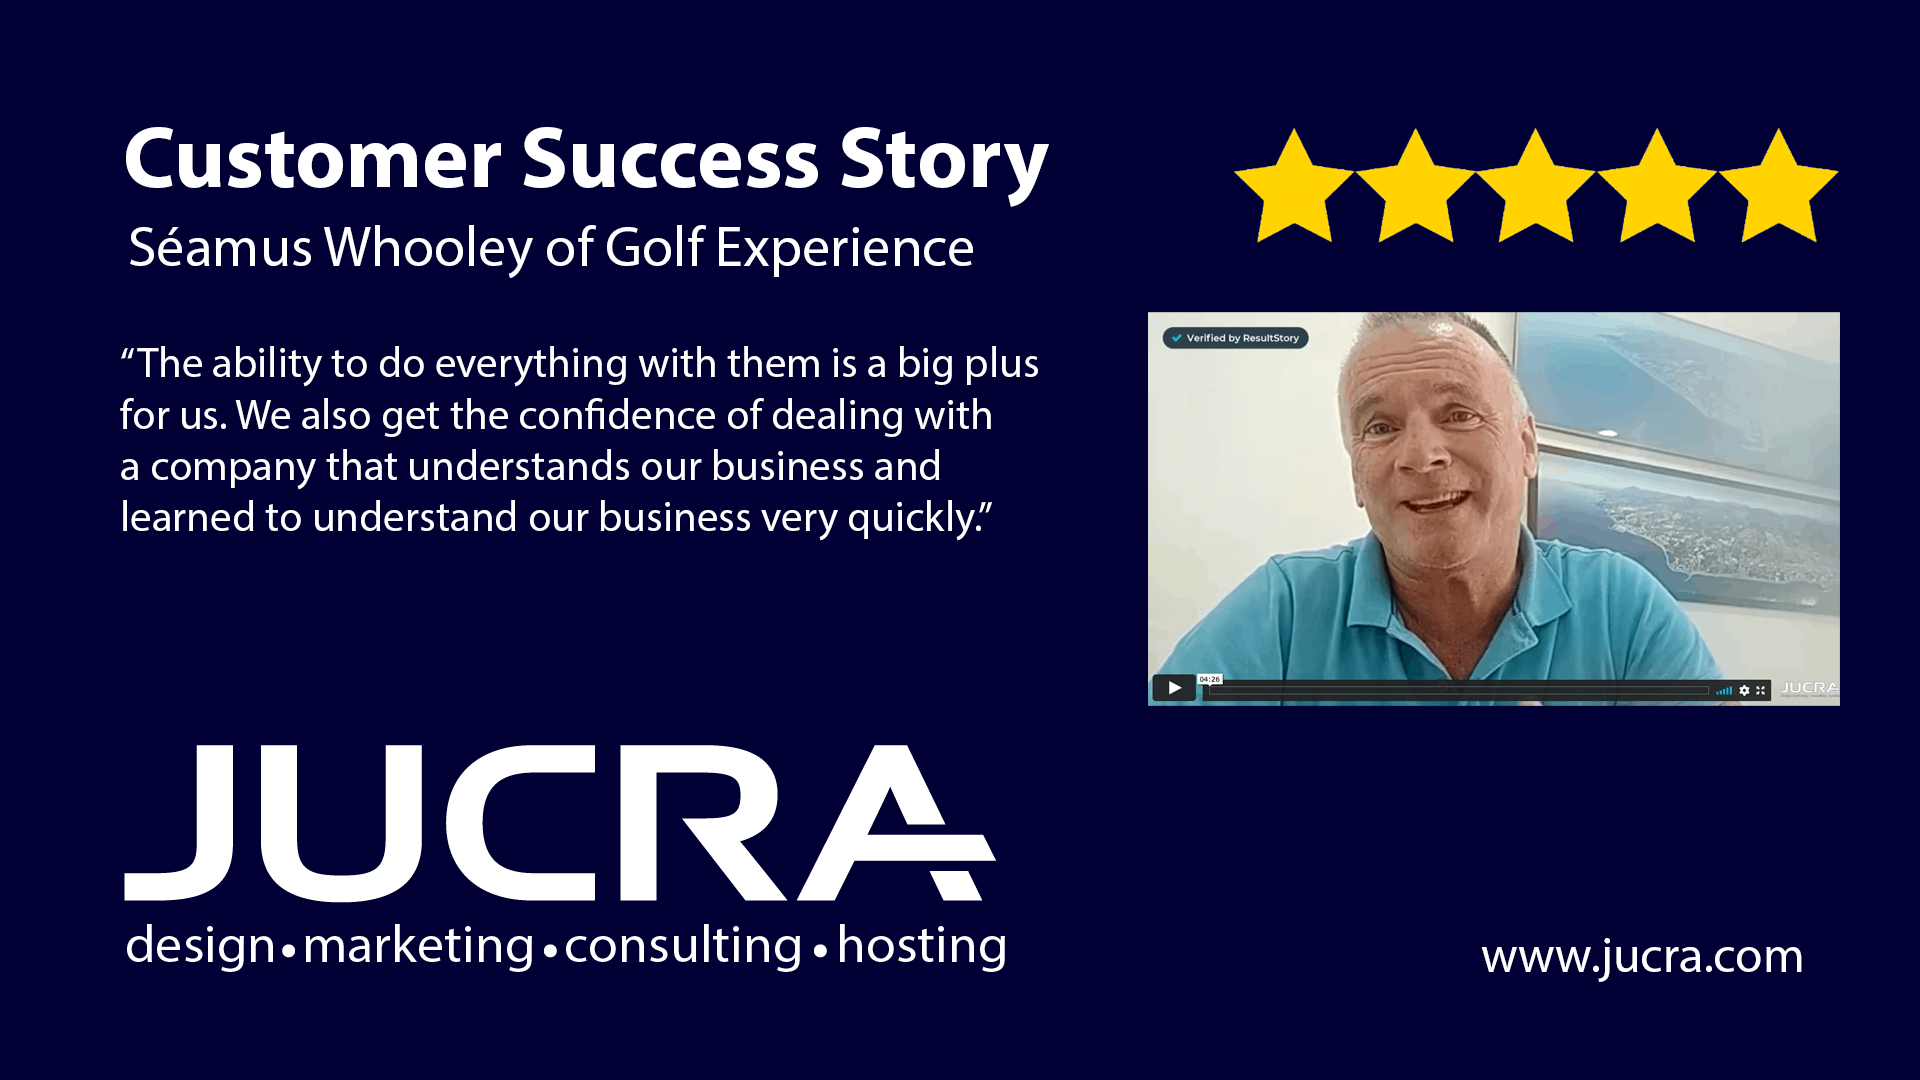 JUCRA Customer Success Story > Séamus Whooley from Golf Experience